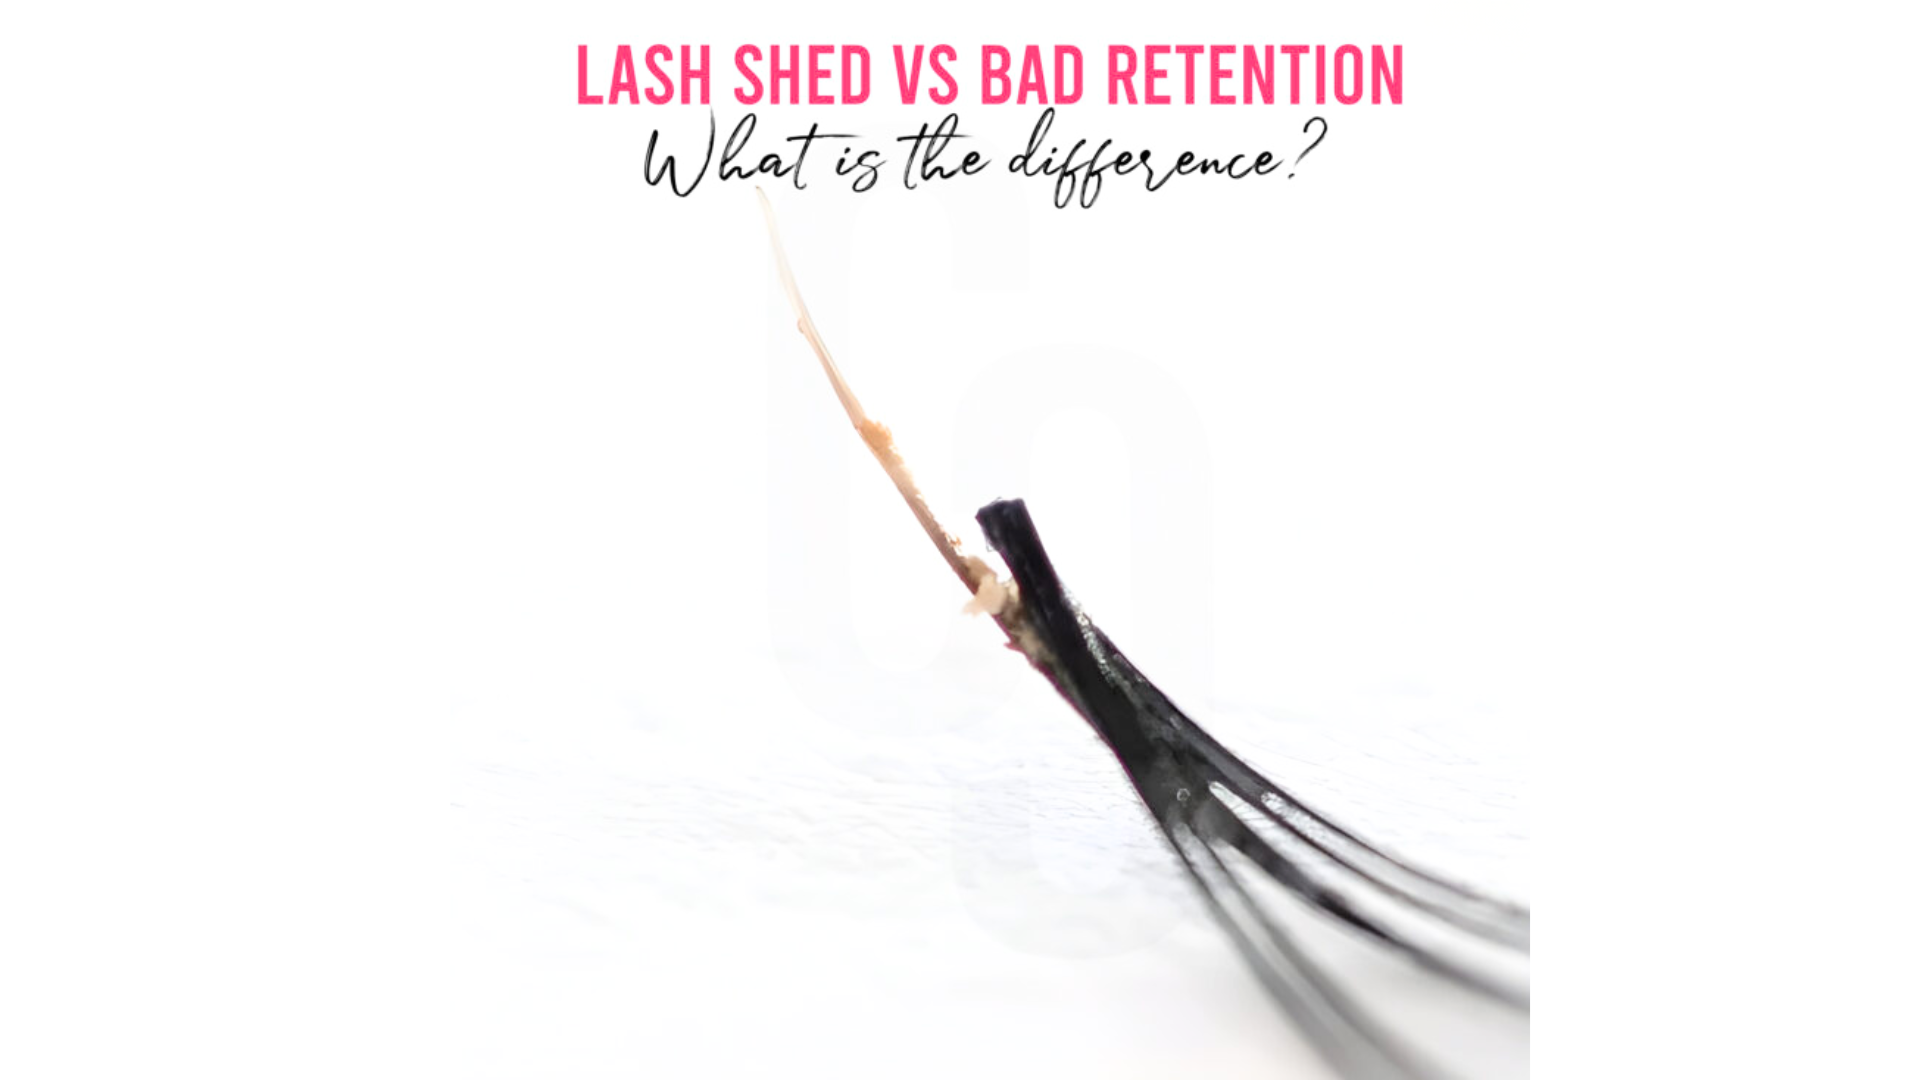 Lash shed vs bad retention, what is the difference?